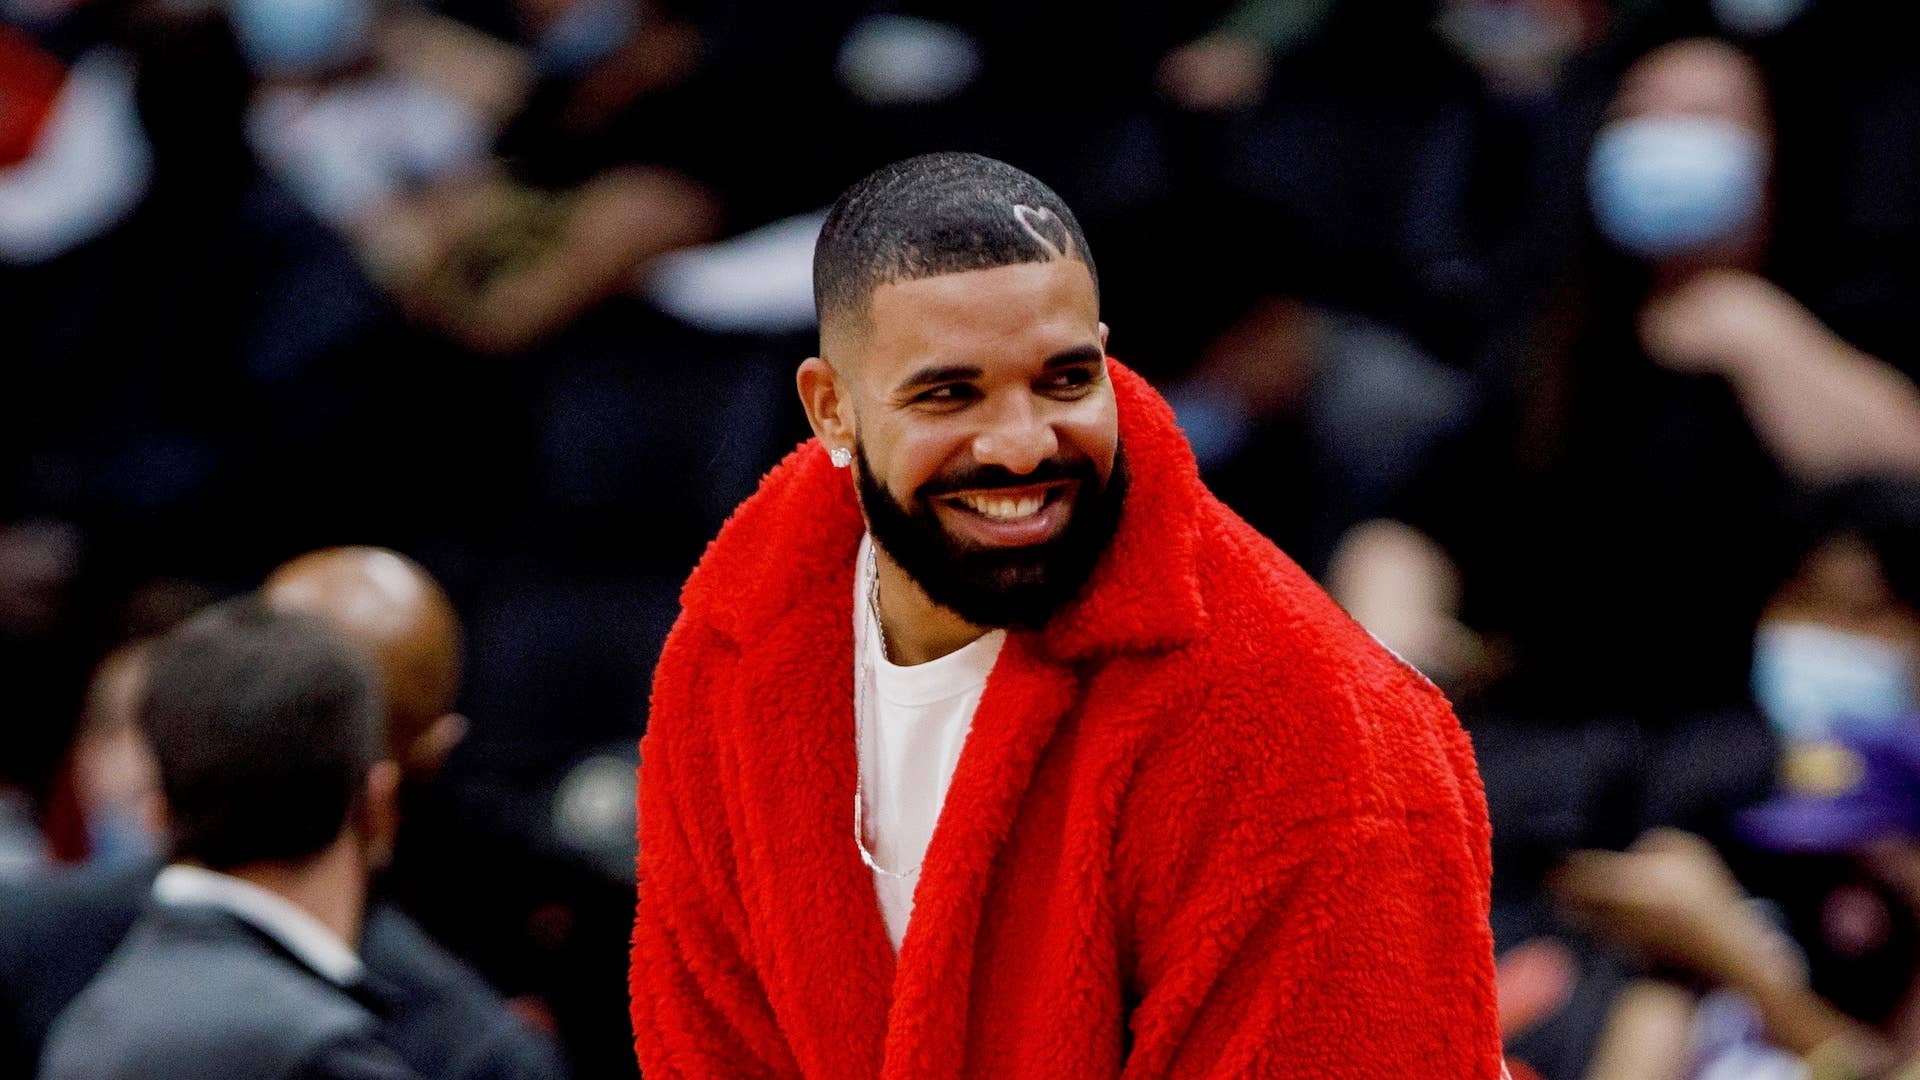 : Drake attends a preseason NBA game between the Toronto Raptors and the Houston Rockets